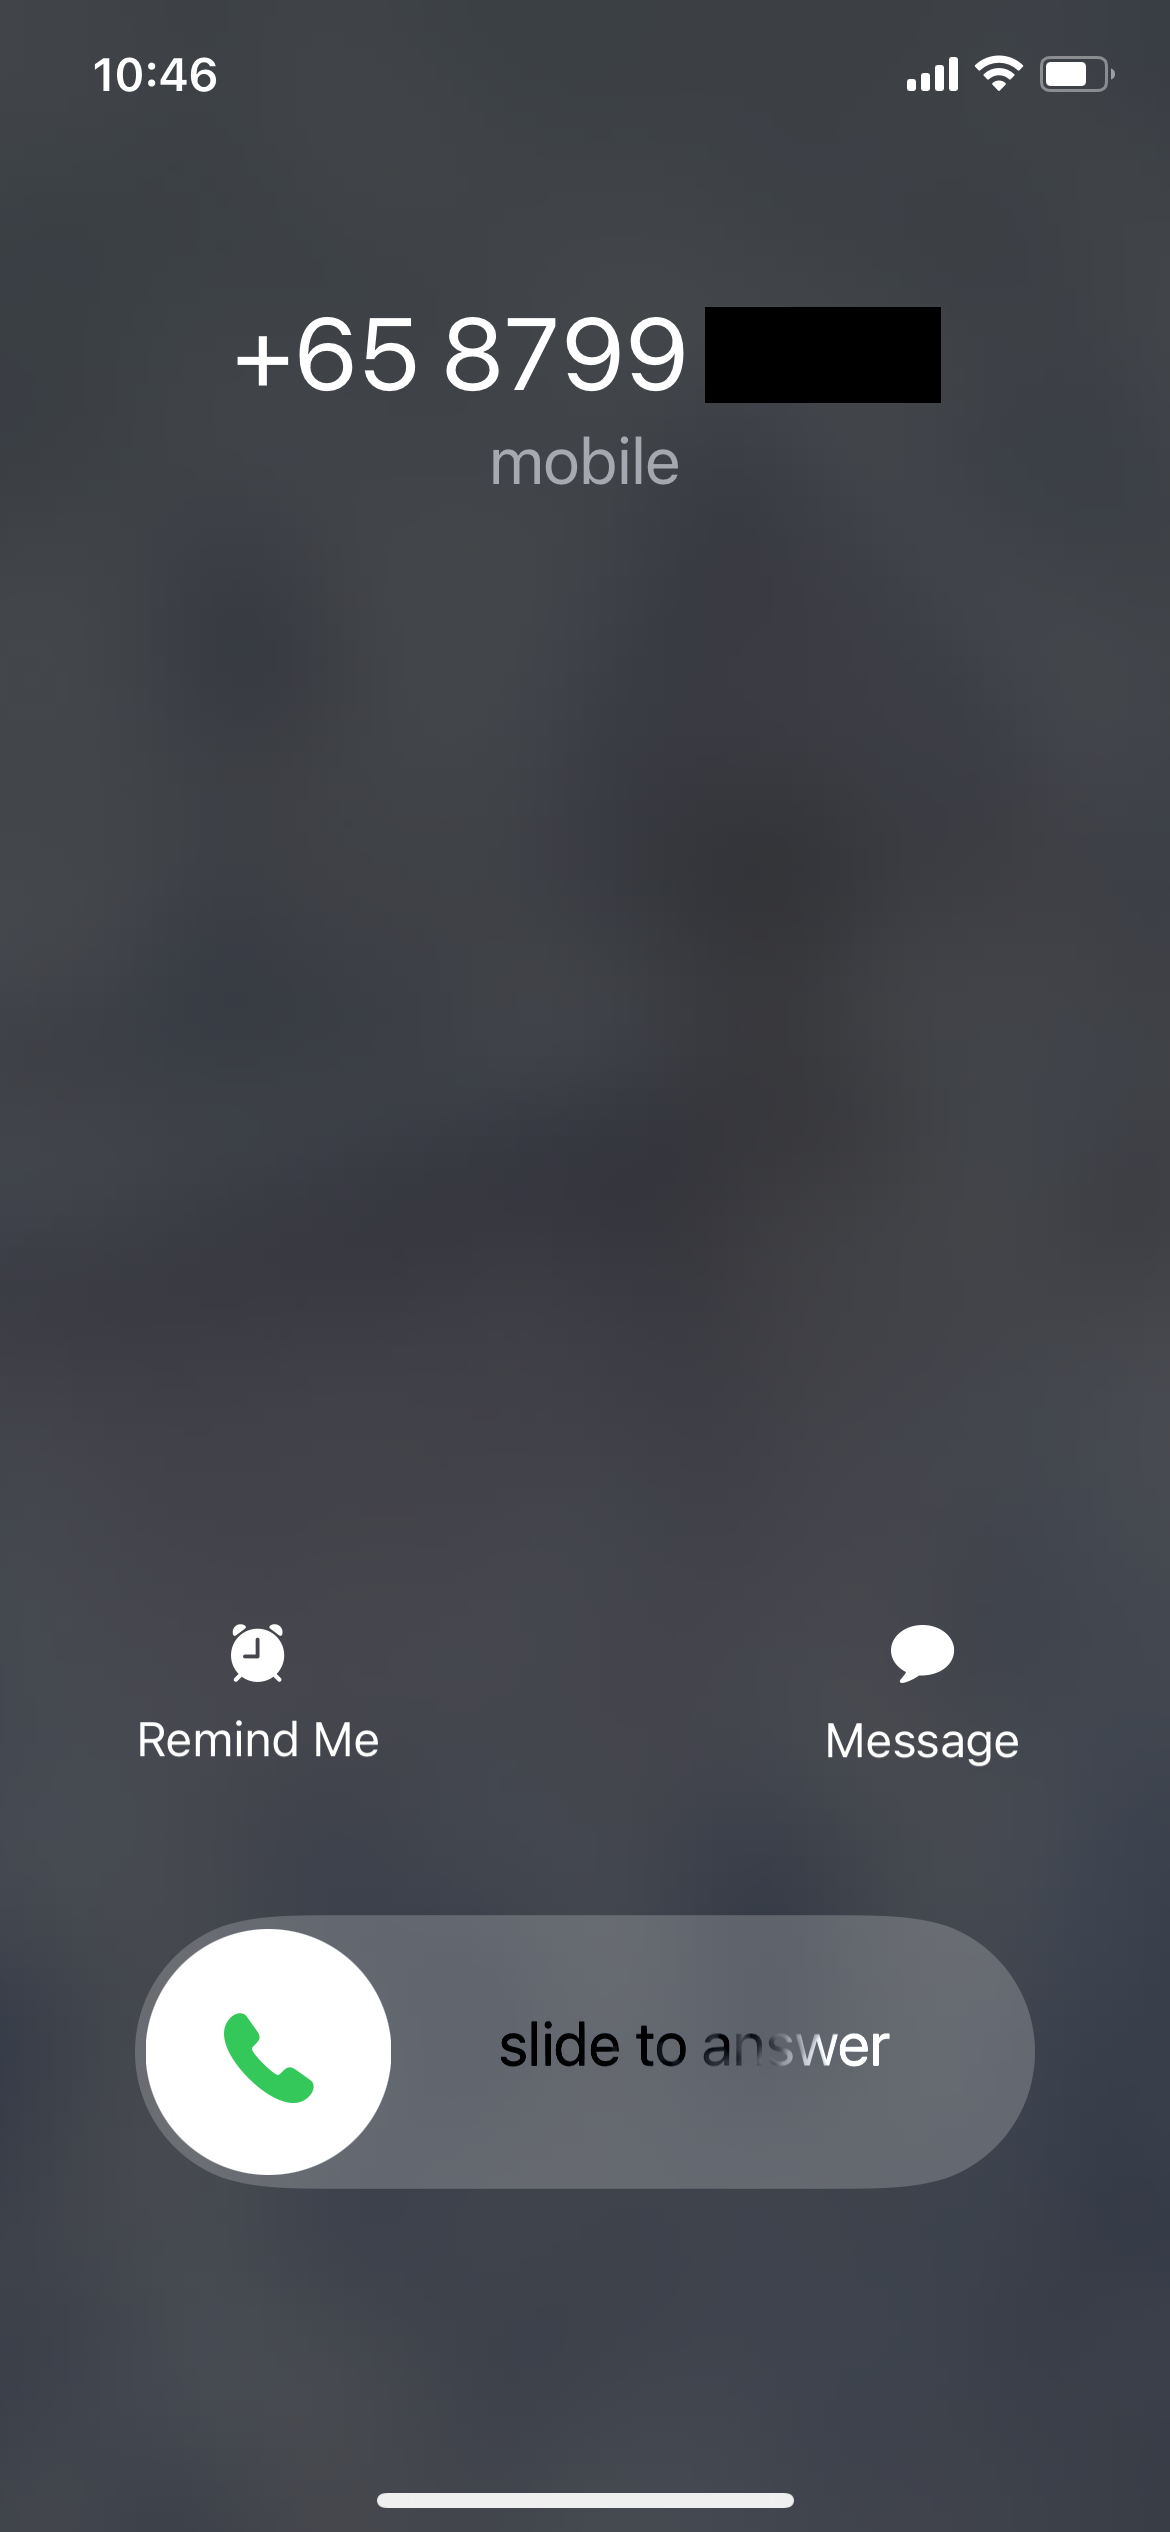 Example of a scam call